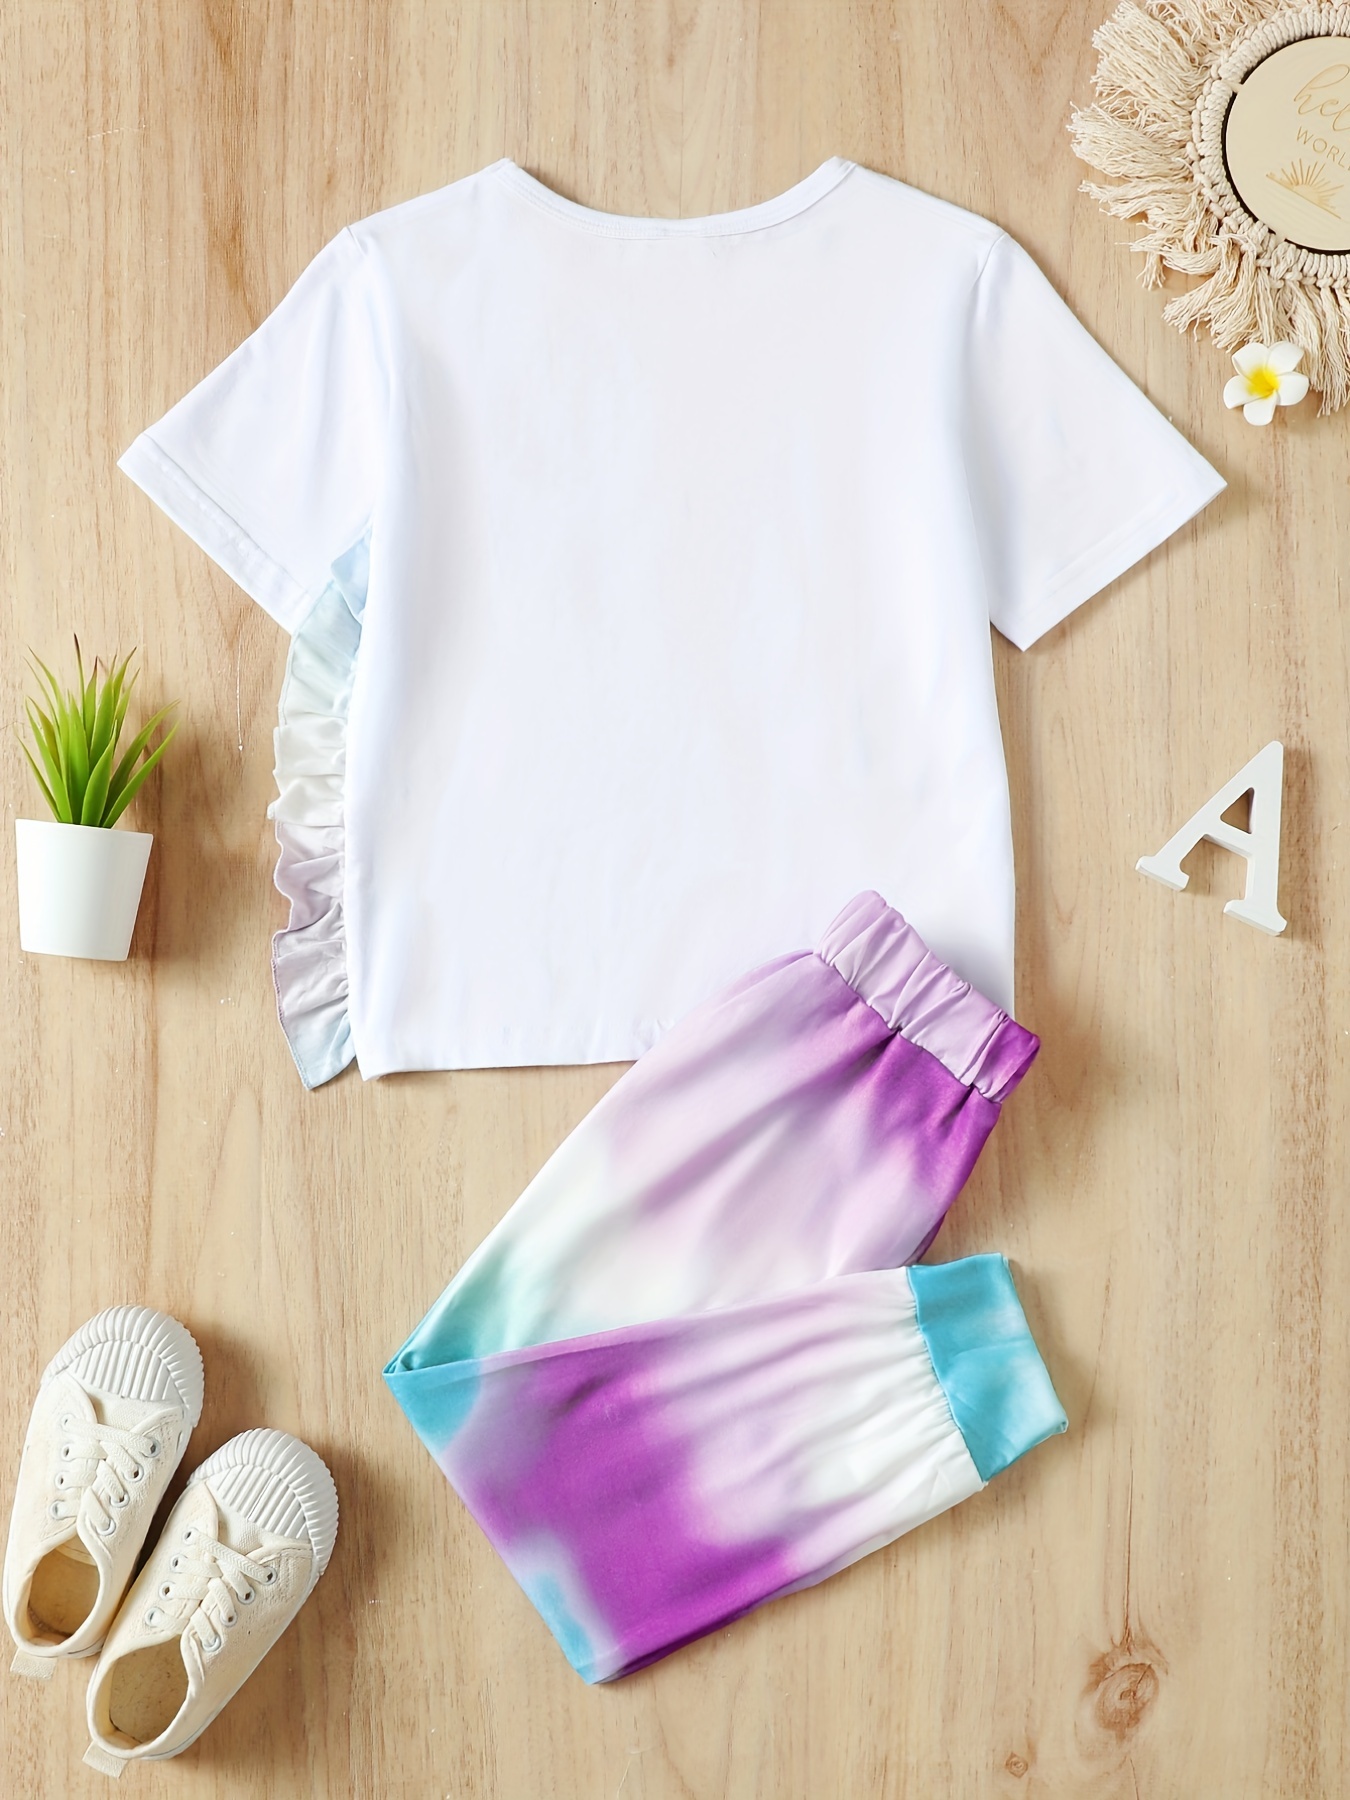 Girls Clothing Sets Summer Two Piece Outfits T Shirts Pants Cute